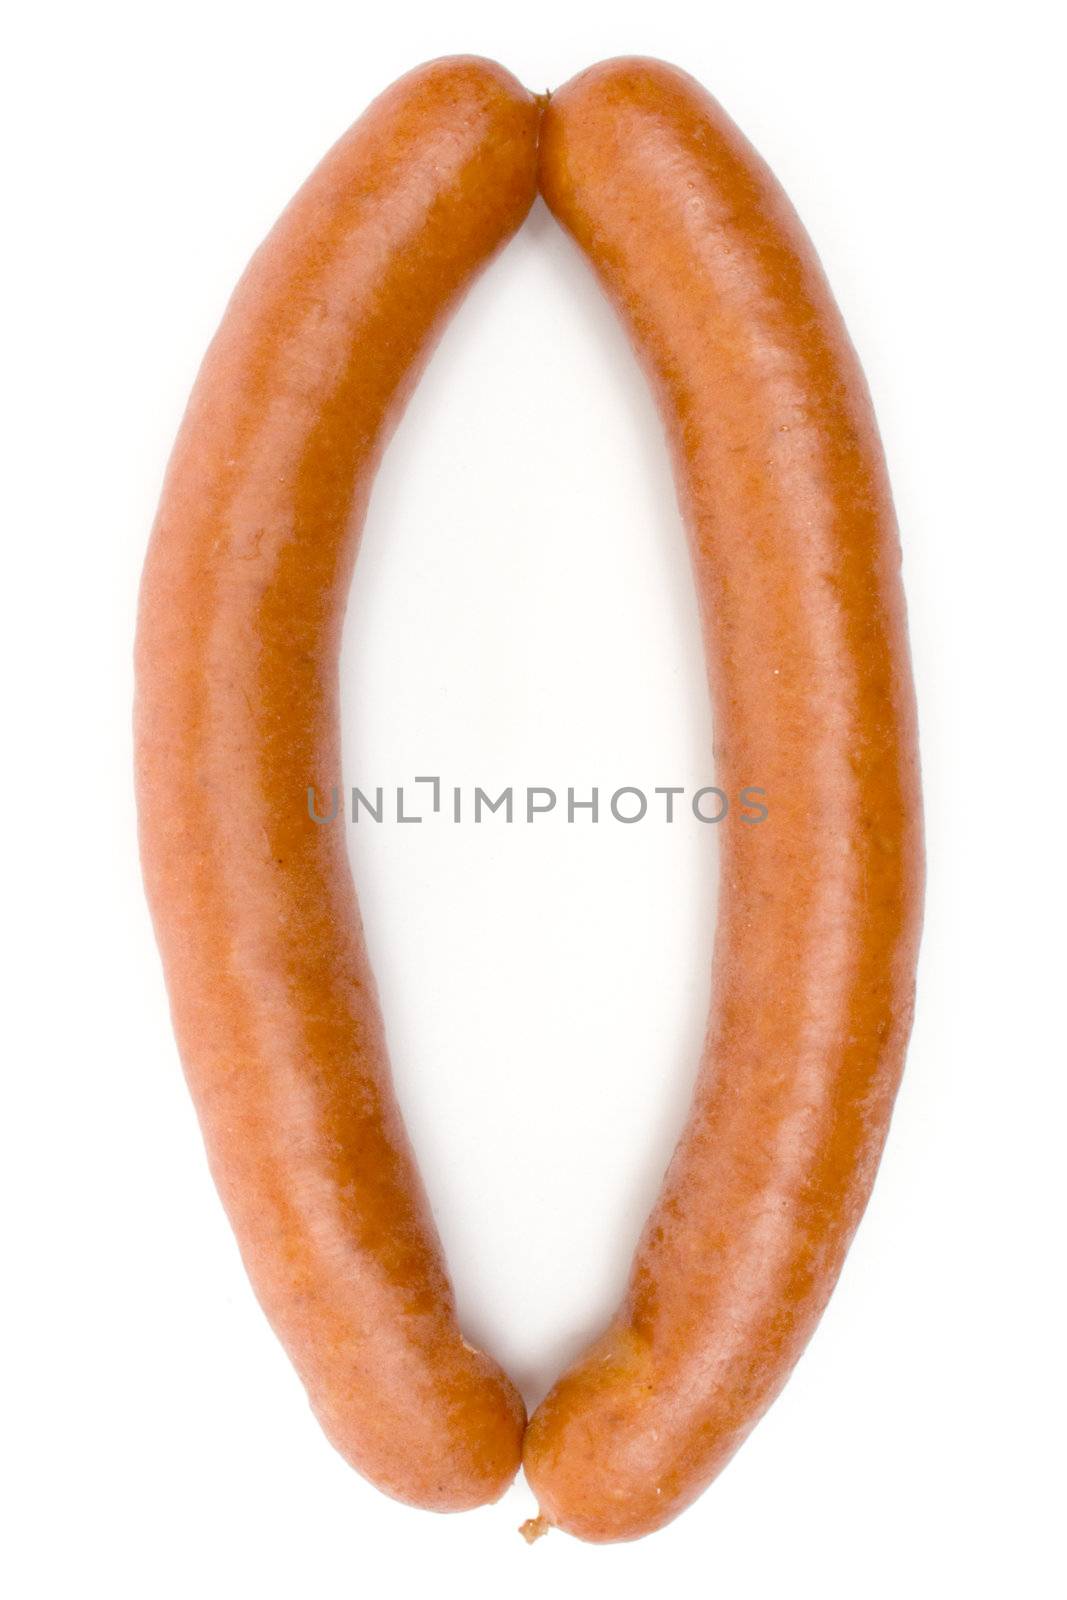 Pair of hot sausages isolated on a white background.